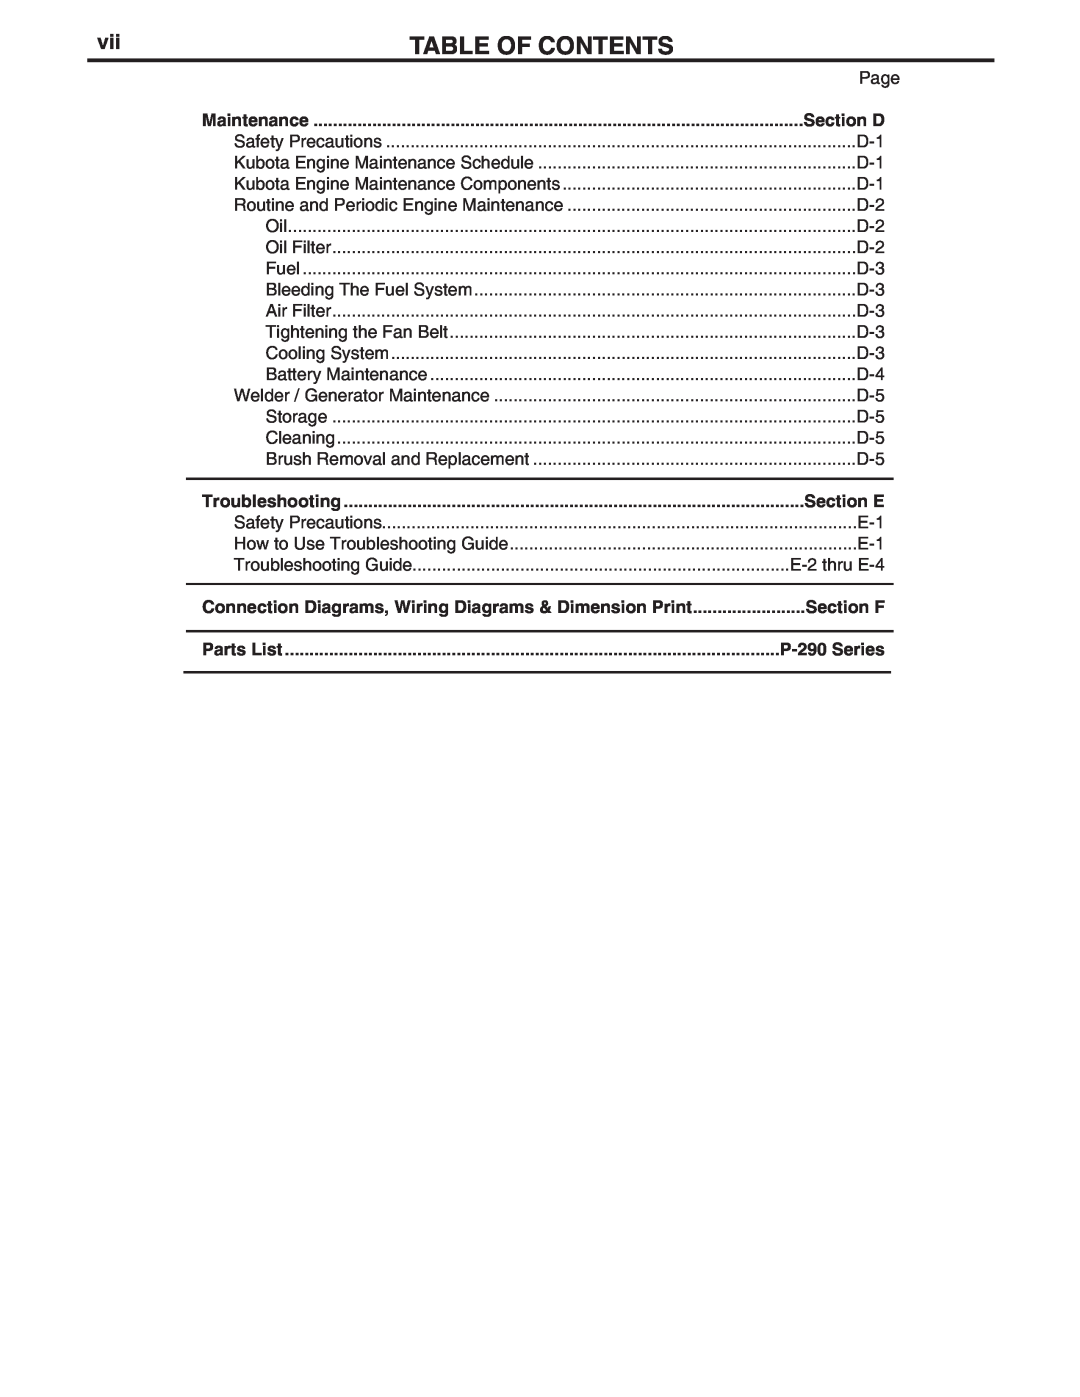 Lincoln Electric 300 DLX manual Table Of Contents, Section D, Section E, Section F, P-290Series 